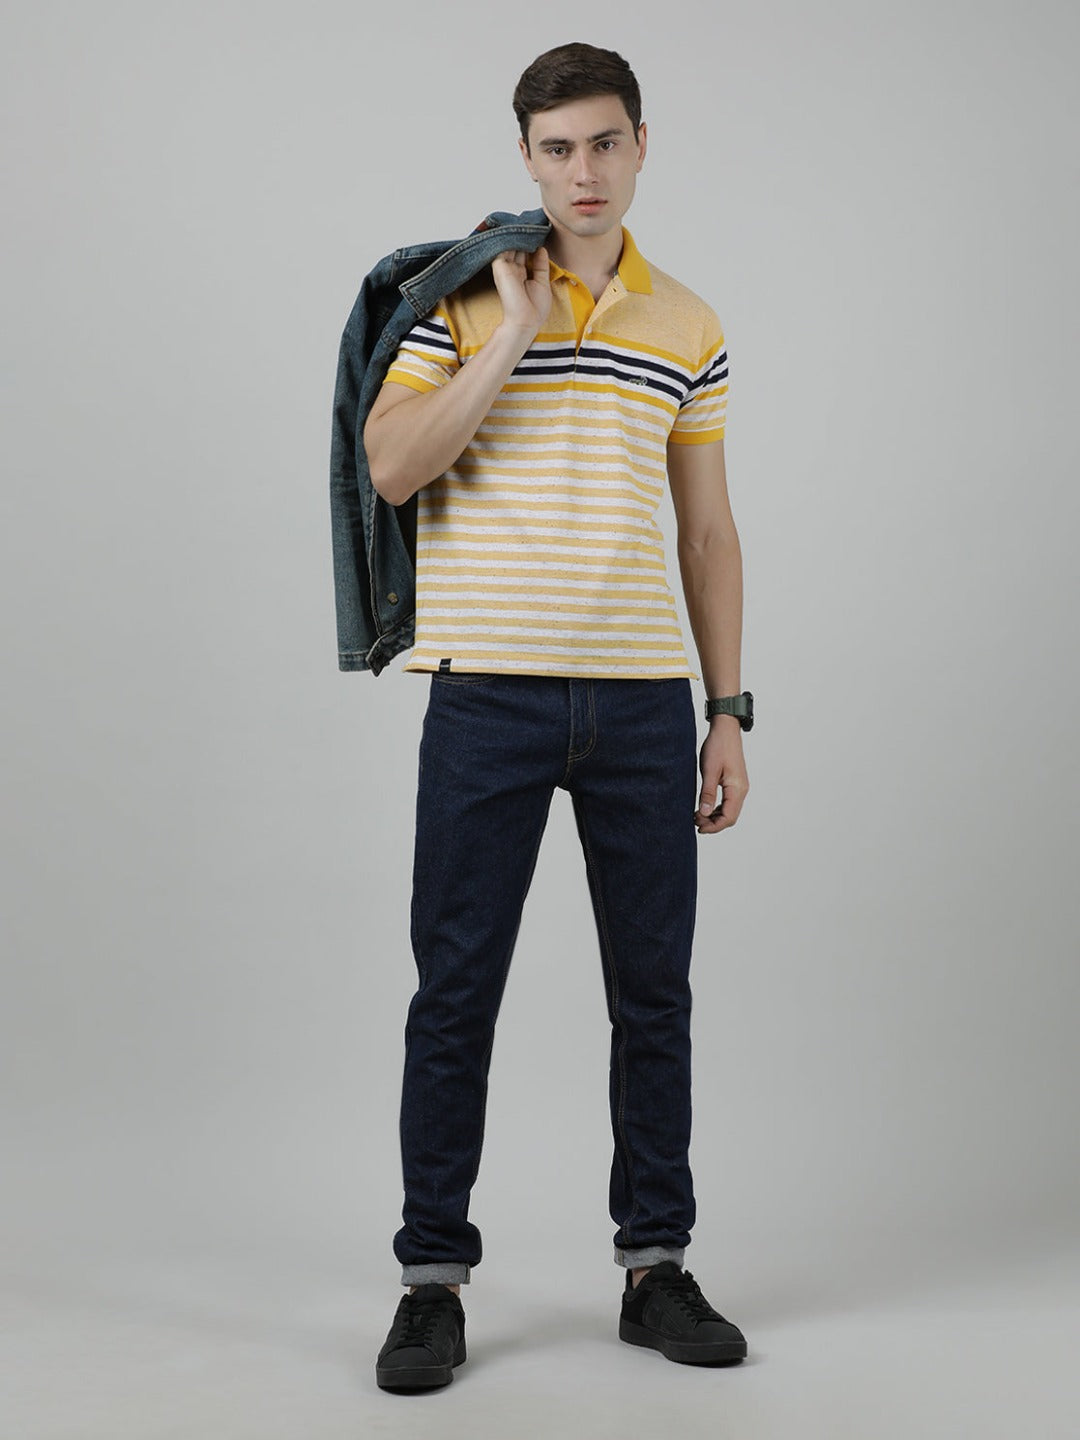 Crocodile Casual Yellow T-Shirt Engineering Stripes Half Sleeve Slim Fit with Collar for Men